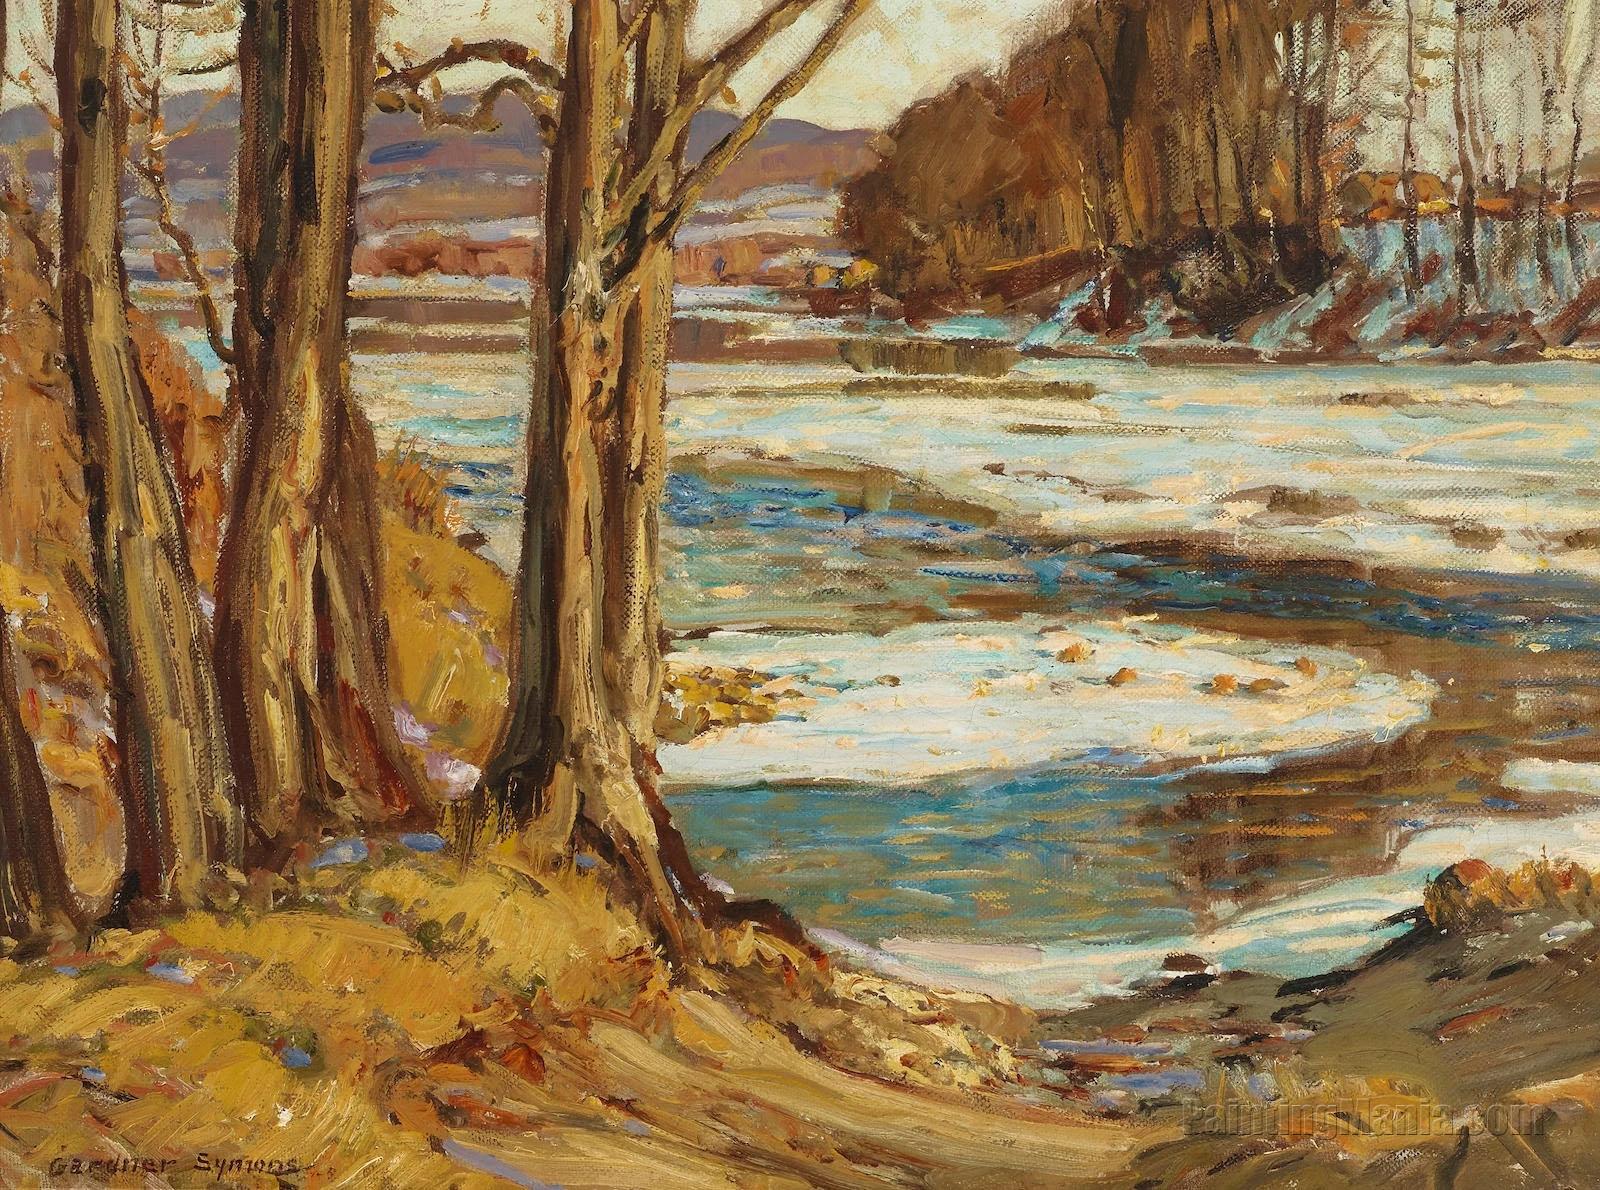 A Bend in a Wintry River